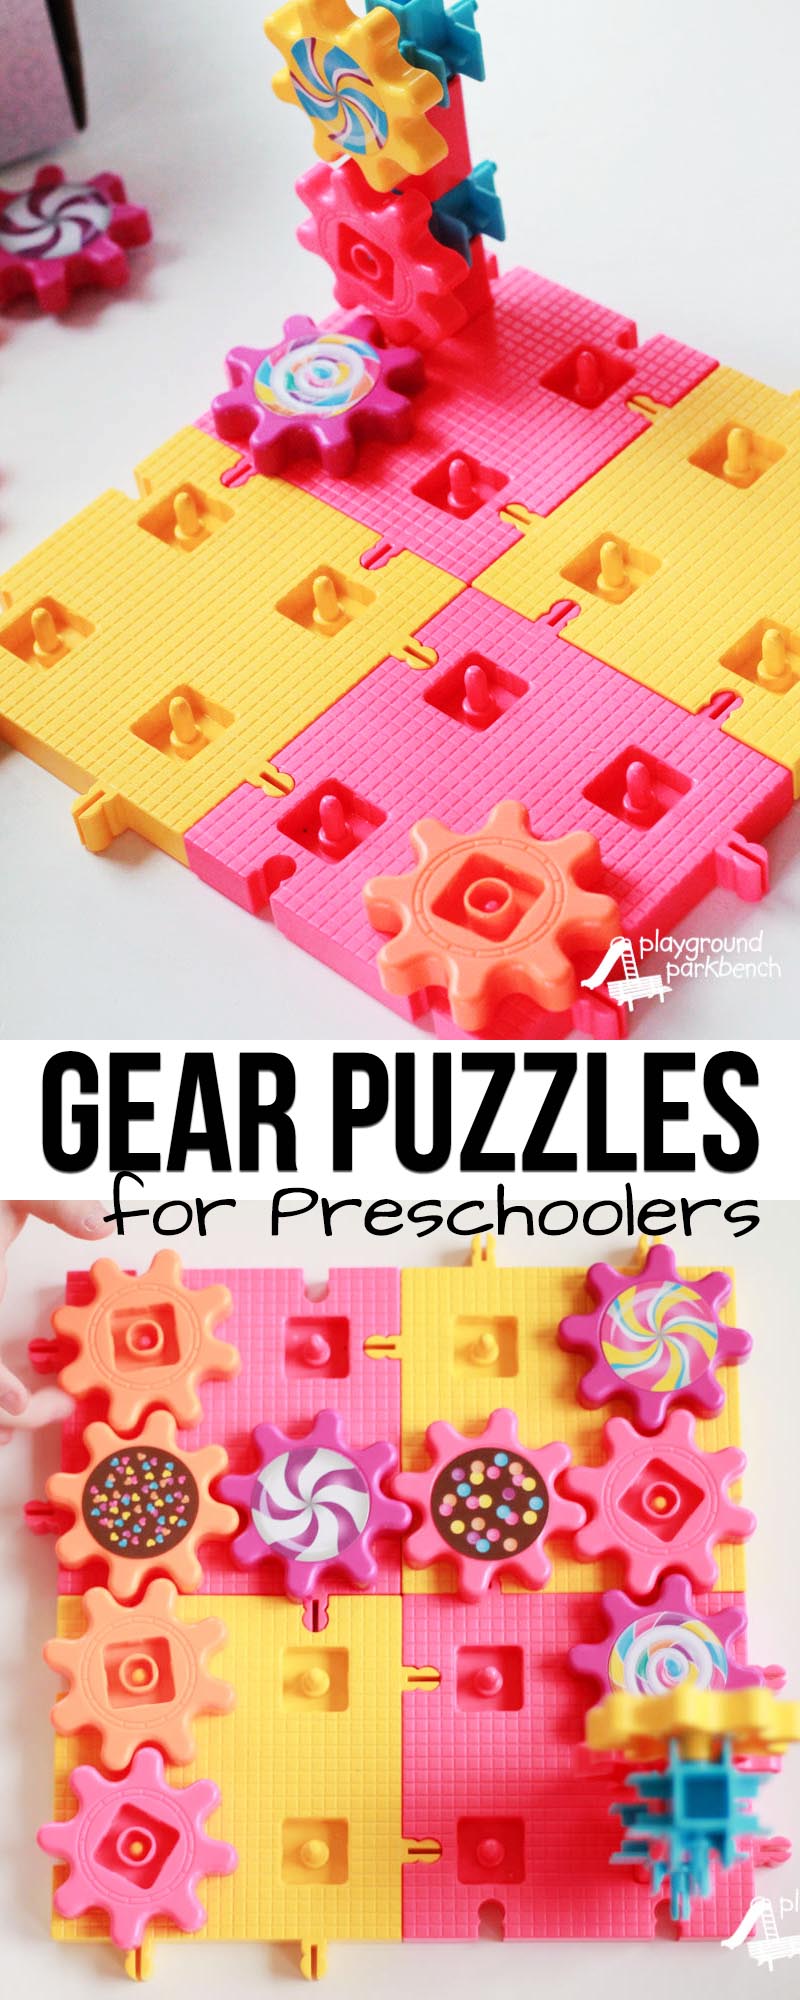 Challenge your preschoolers spatial reasoning and problem solving skills with this STEM Challenge. Use a set of gear toys to create a gears game or puzzles to engage their preschool engineering skills. | STEM | STEAM | Preschool Engineering | 